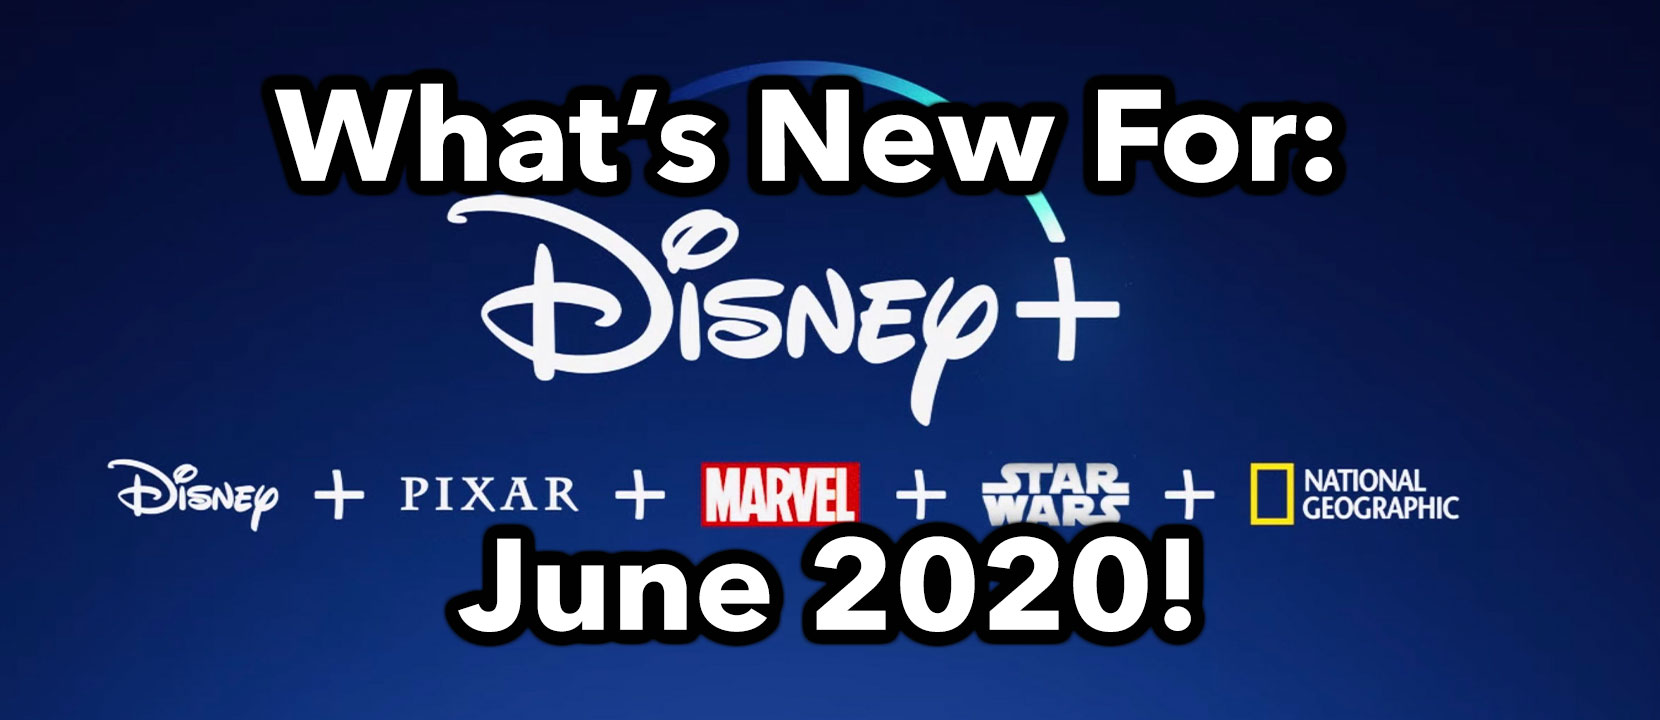 Disney Plus What's new in June! How to Kill an Hour